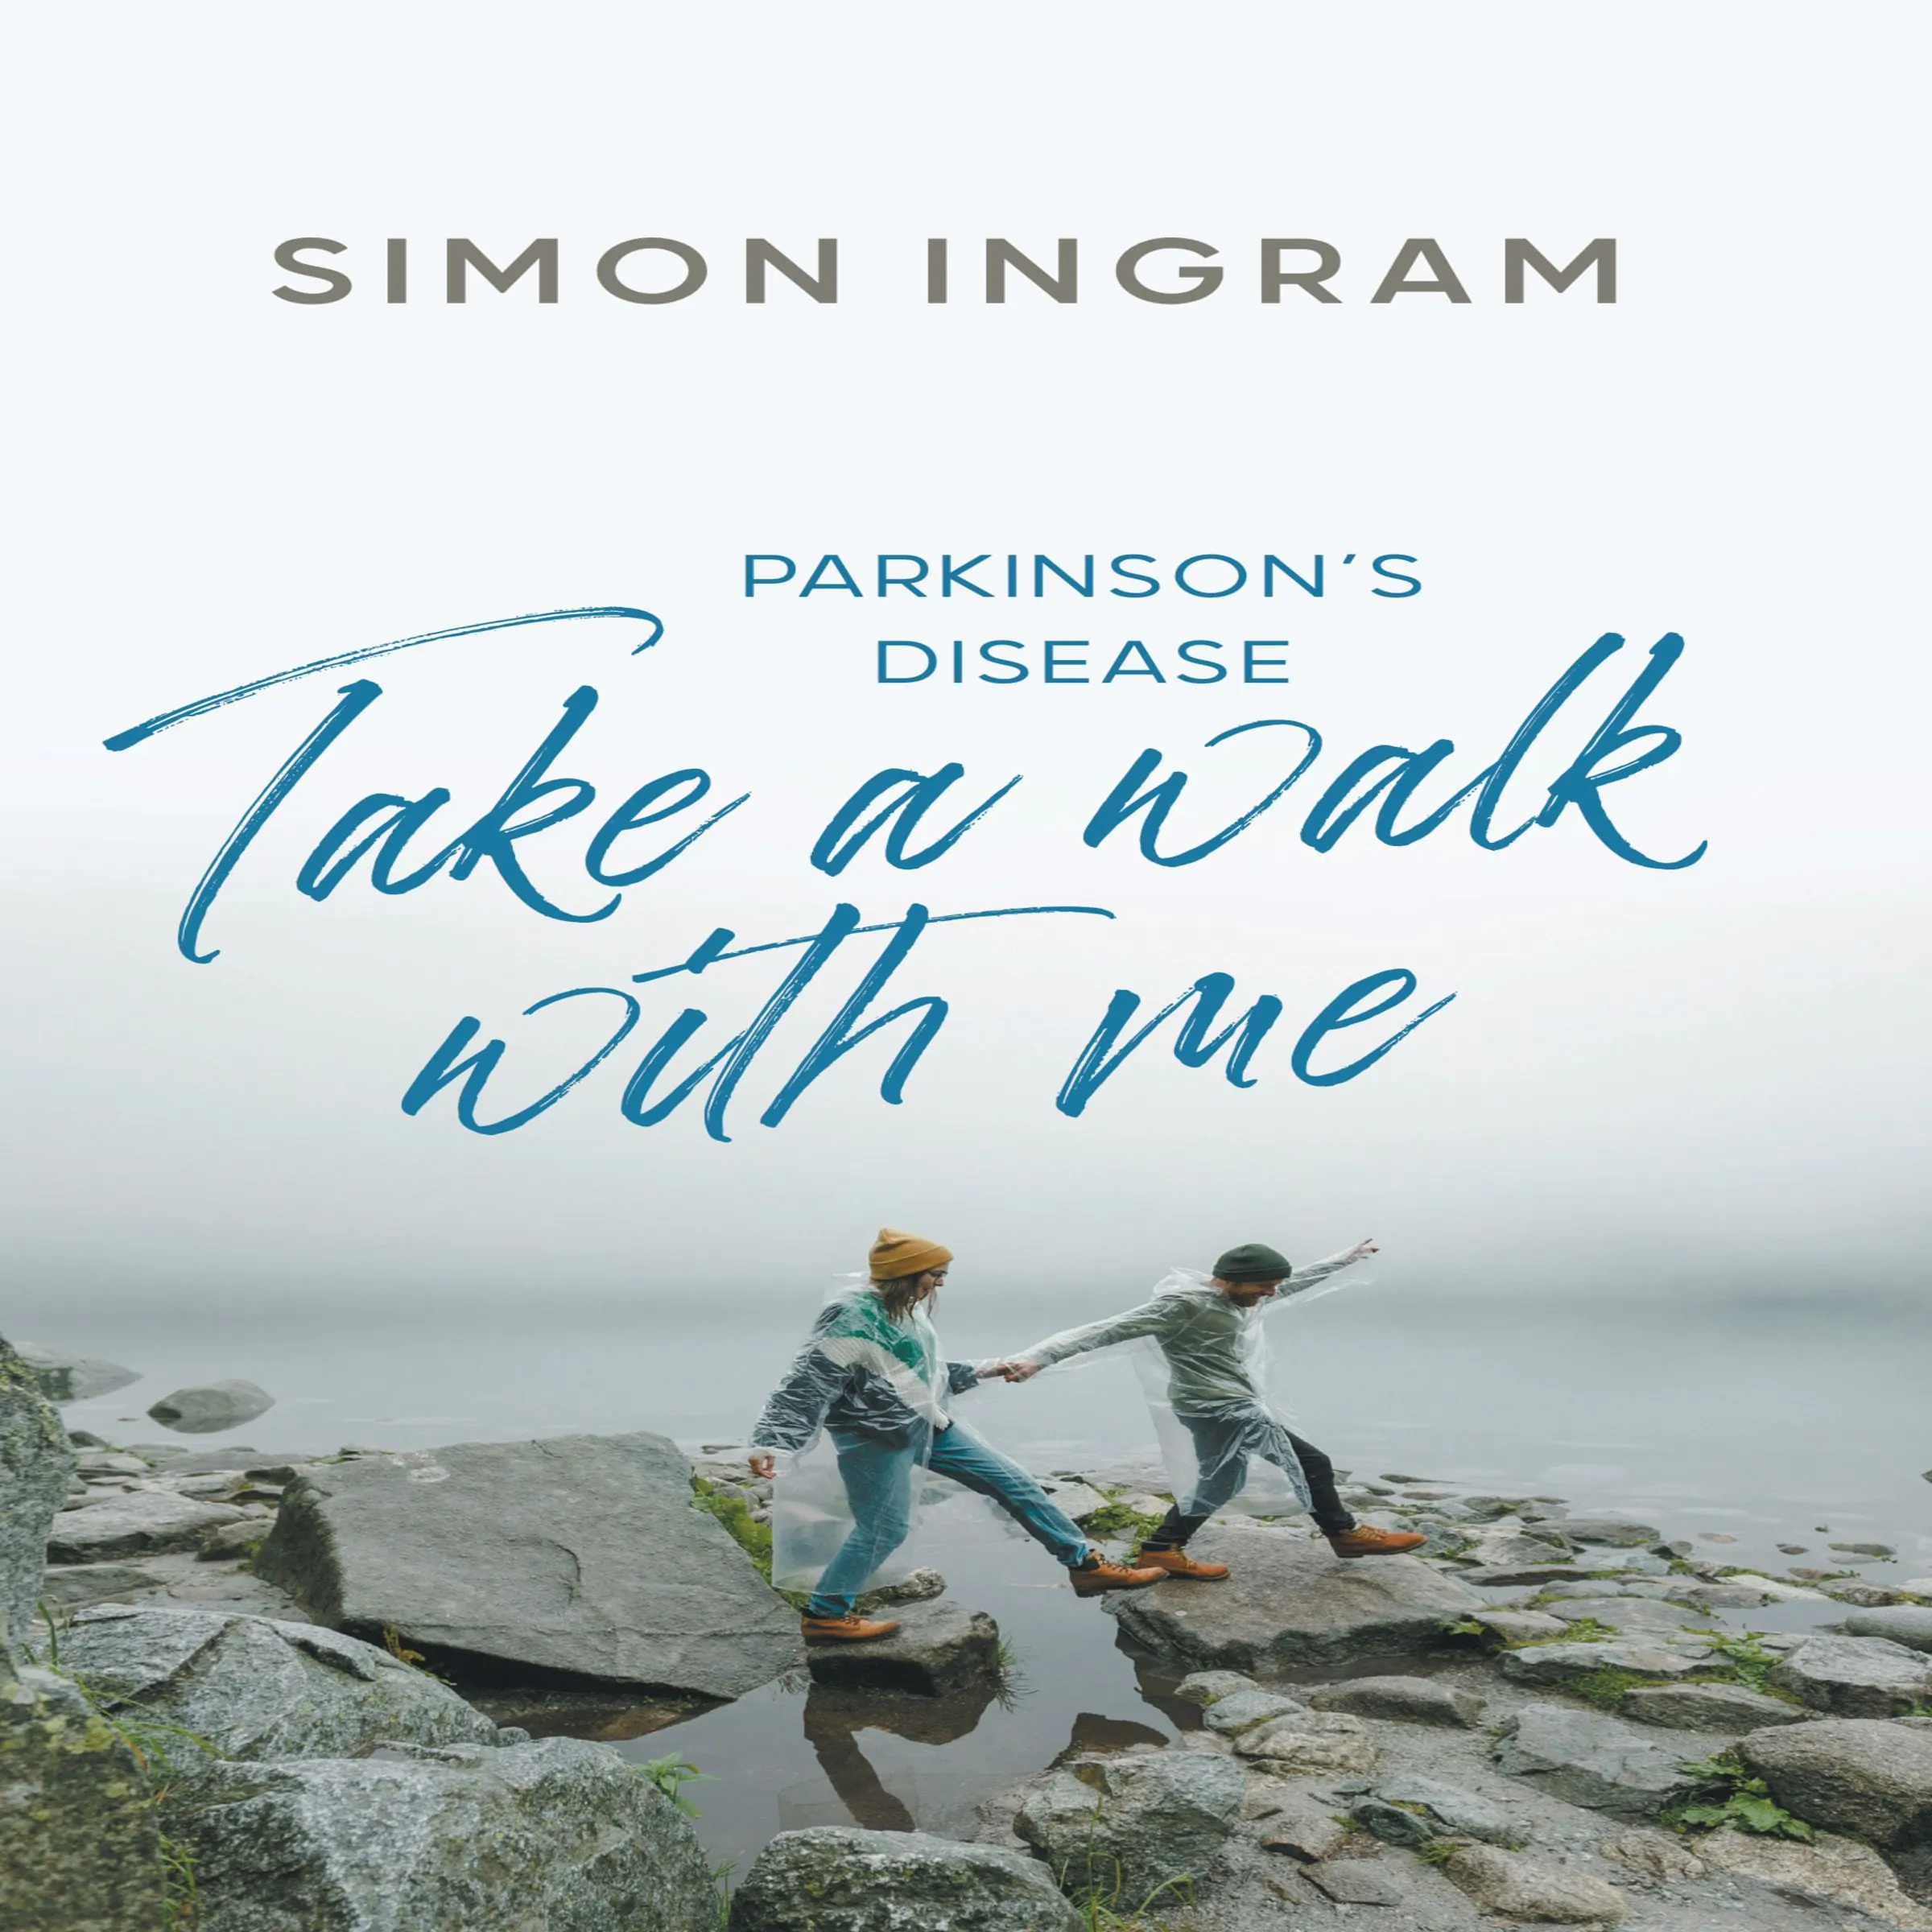 Take A Walk With Me Audiobook by Simon Ingram